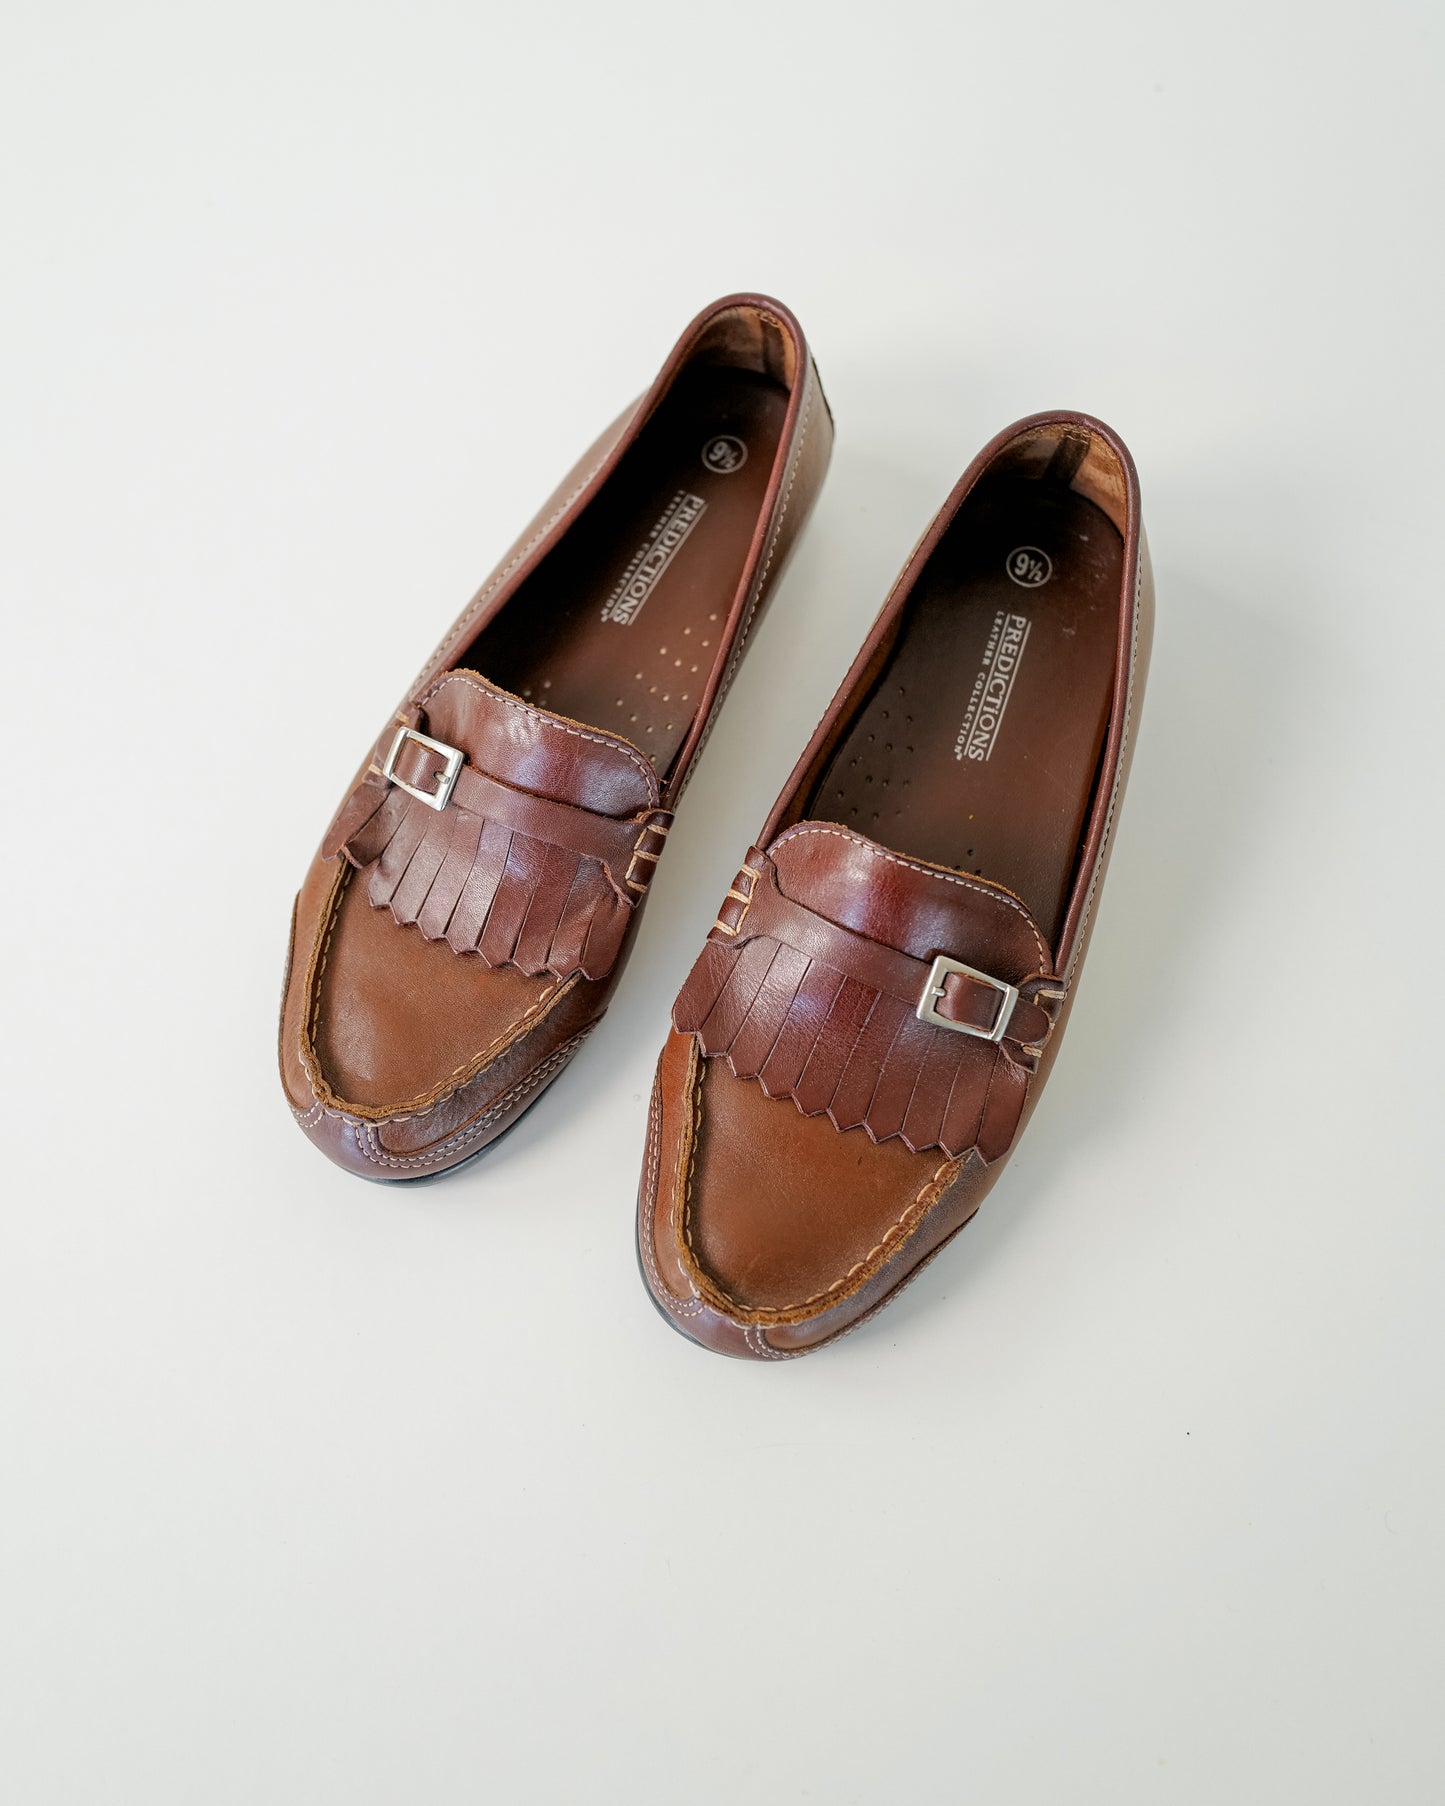 Vintage Leather Loafers - Size 8.5